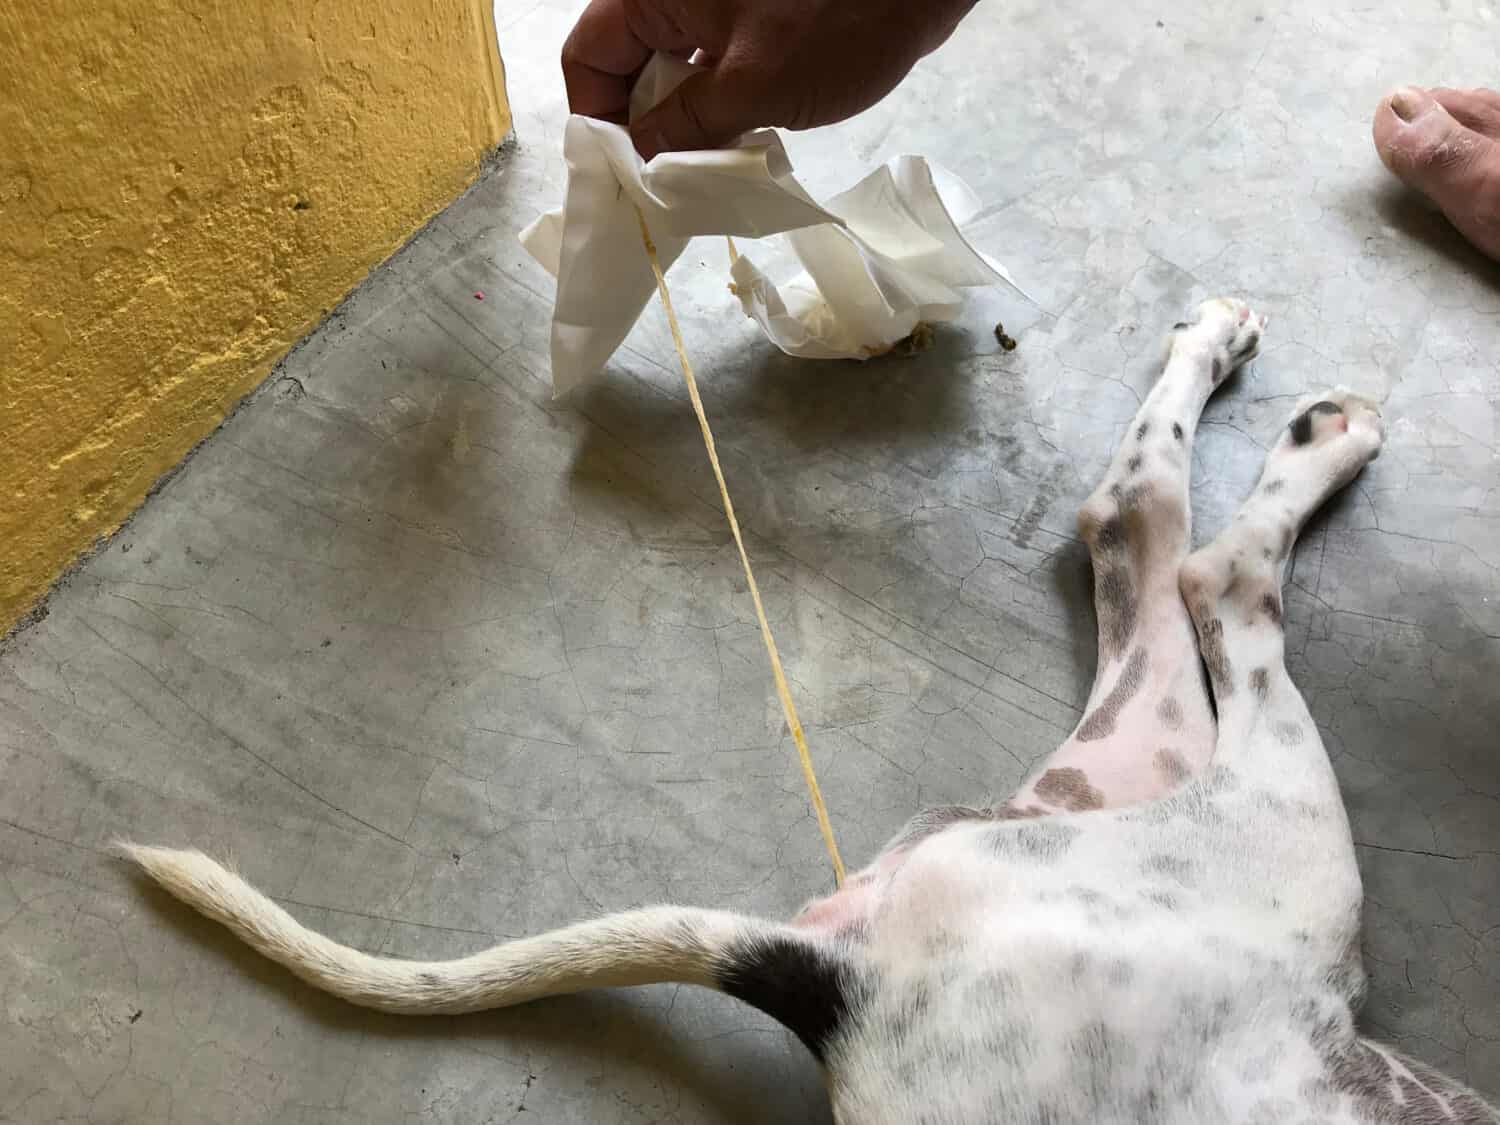 A resilient canine confronting the challenges of internal parasites, highlighting the significance of proactive parasite prevention and treatment .